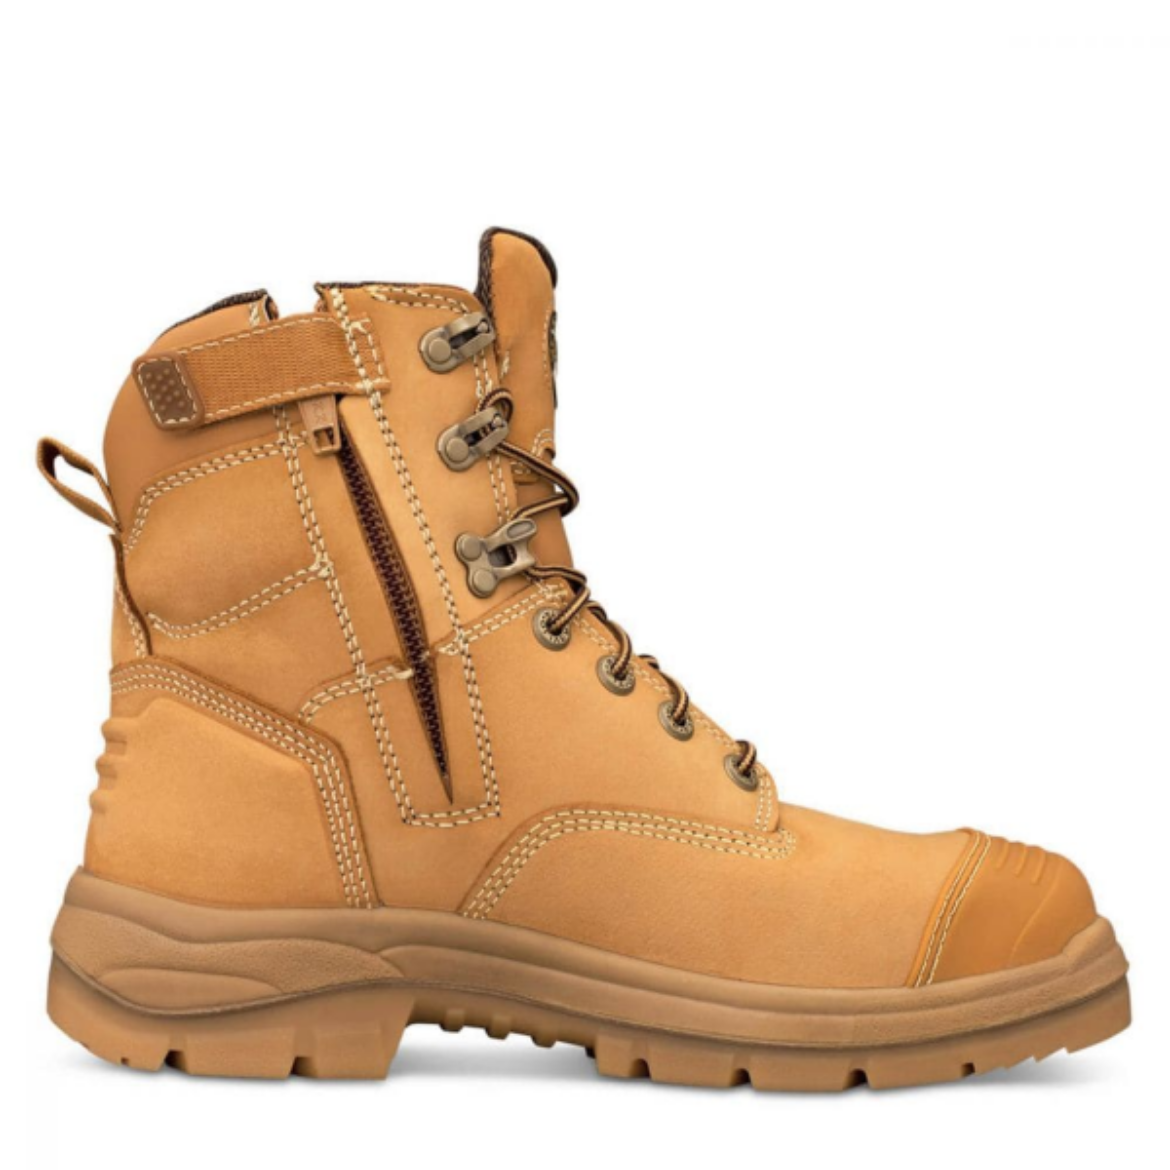 Picture of 150MM ZIP SIDE LACE UP BOOT, WATER RESISTANT NUBUCK LEATHER, COOLSTEP
LINING, LACE LOCKING DEVICE